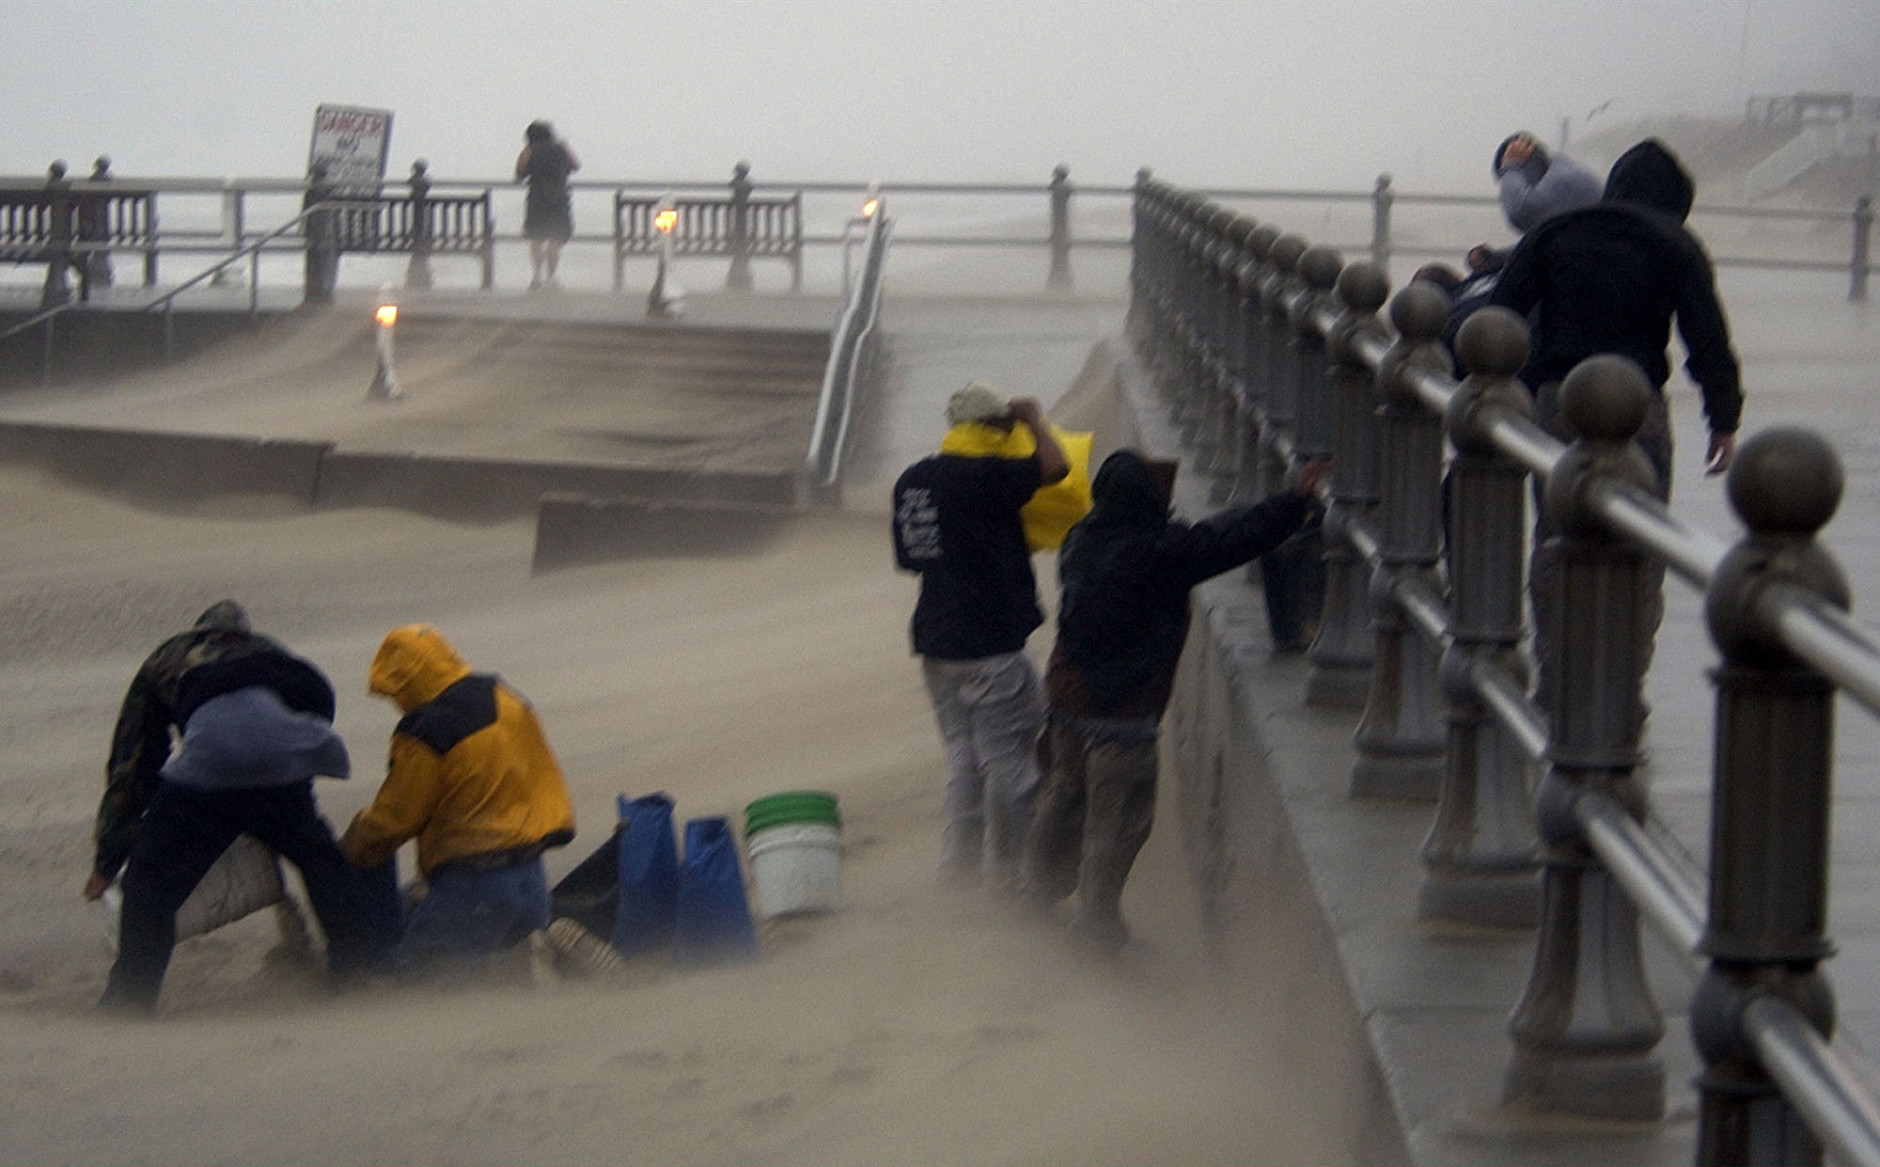 A cleanup crew loads sandbags in the blowing wind and rain on the oceanfront in Virginia Beach, Va., Thursday Sept. 18, 2003. Hurricane Isabel is expected to make landfall later in the day.   (AP Photo/Steve Helber)